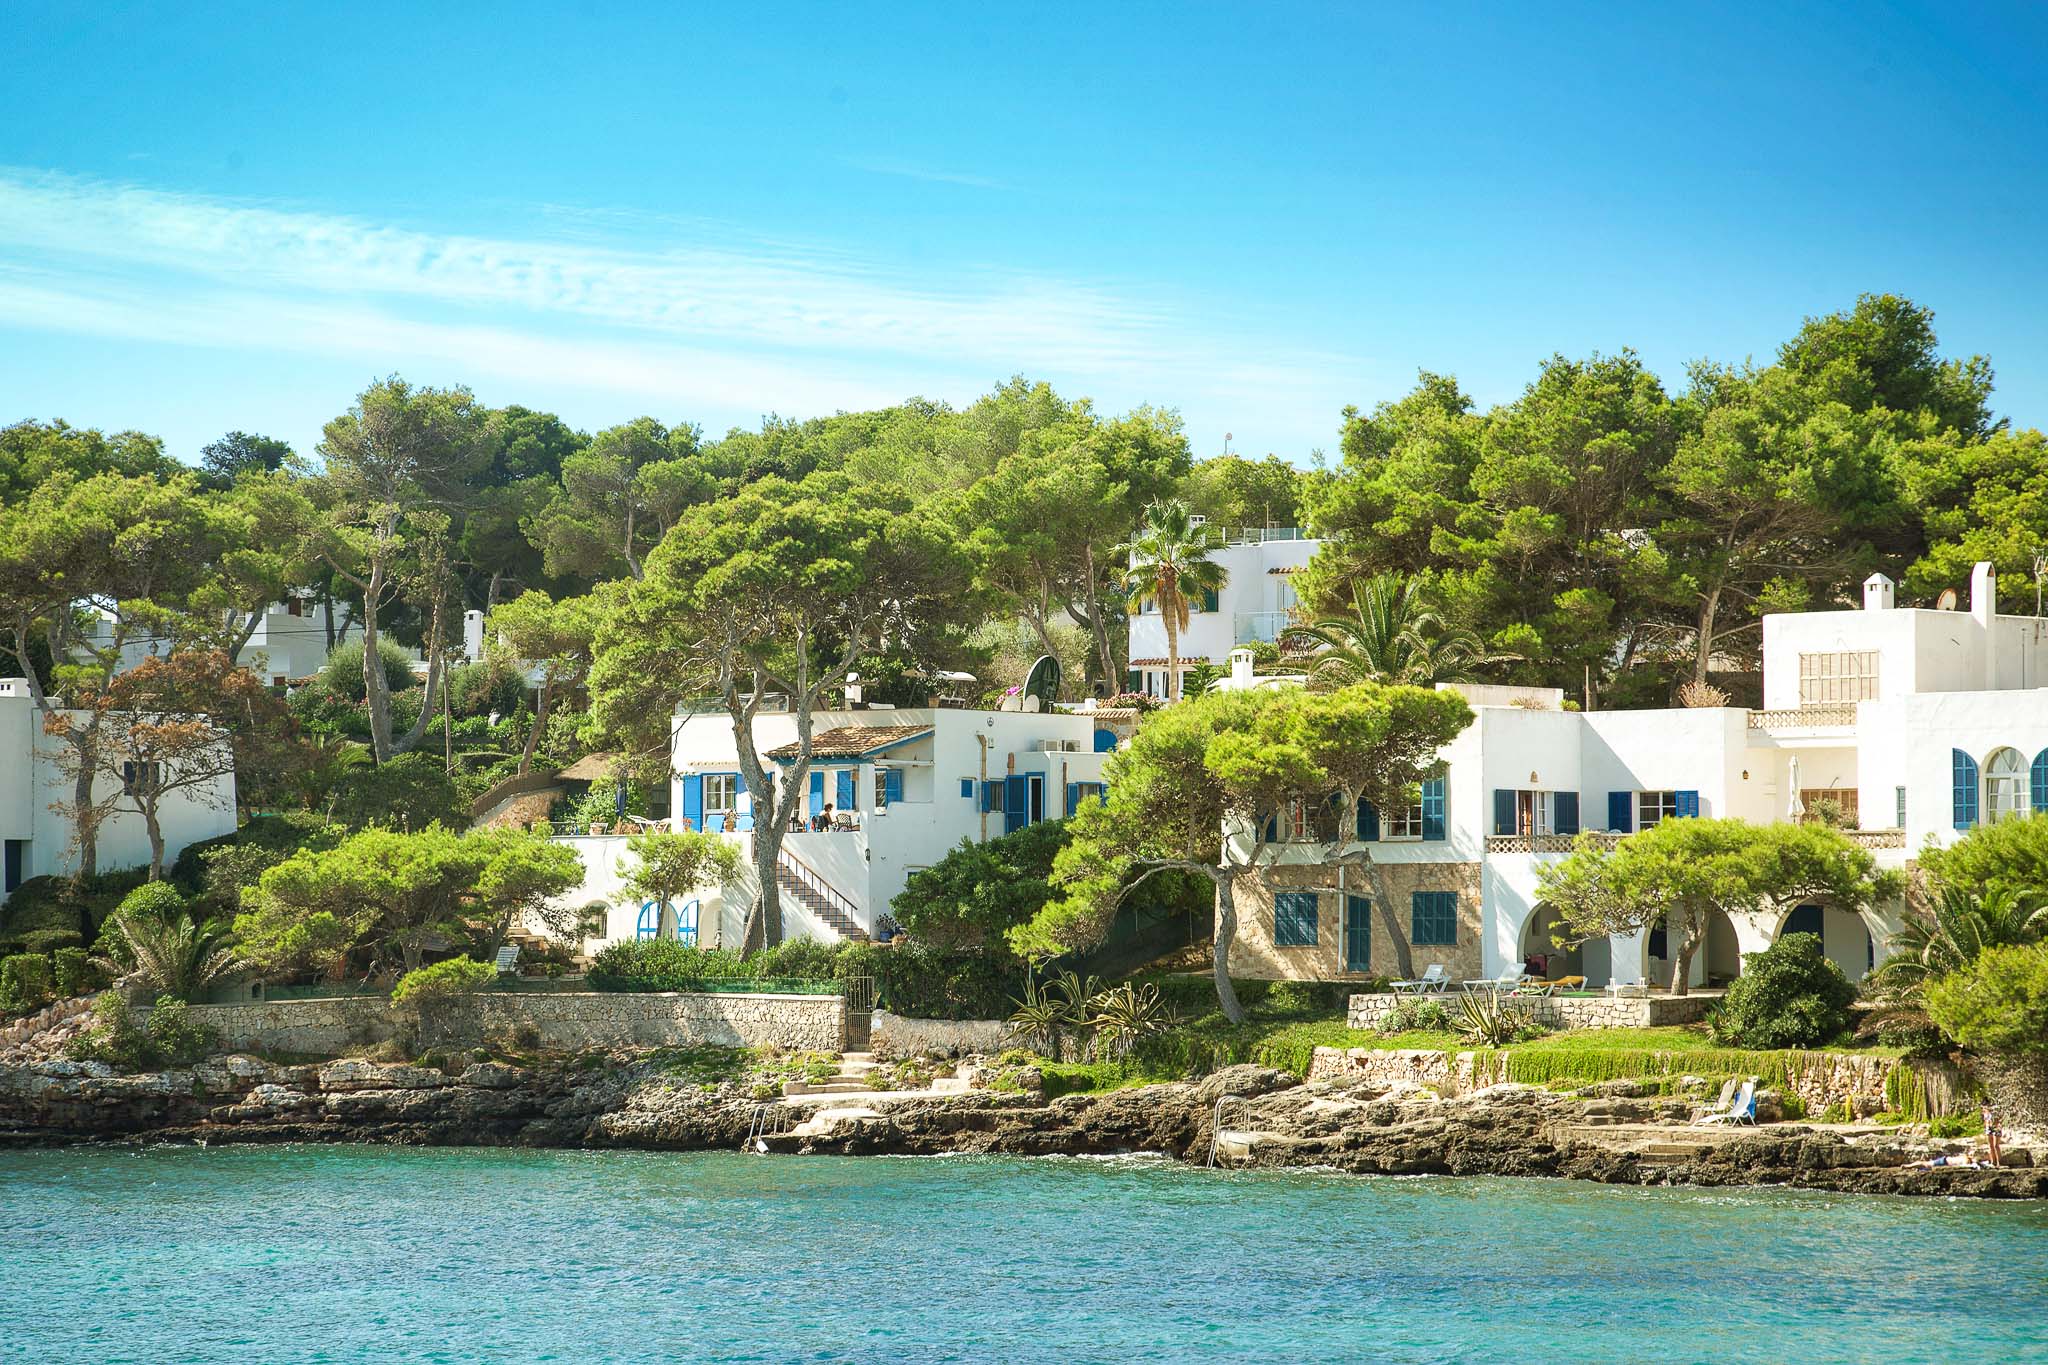 Cala d'Or coast with white houses and pine trees